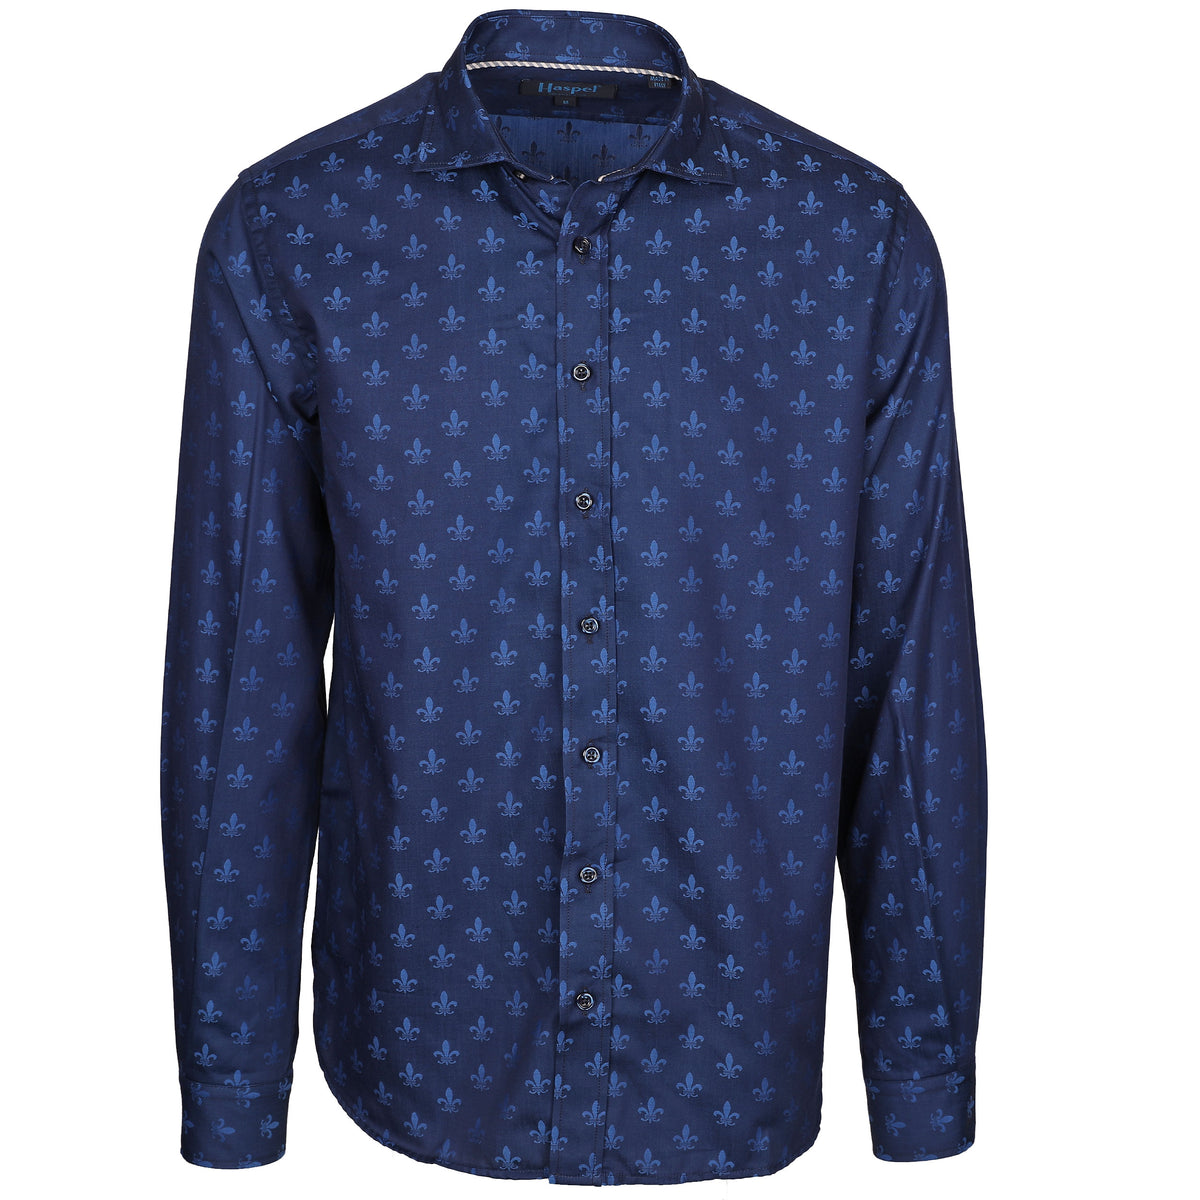 Let your New Orleans style shine with this Carroll Royal Blue Fleur De Lis Sport Shirt. Featuring a subtle fleur de lis pattern and navy-blue buttons, this sporty, yet stylish, shirt will be the talk of the town! Show off your chic Louisiana flair in this royal blue beauty fit for a King.  100% Cotton • Spread Collar • Long Sleeve • Machine Washable • Made in Italy • Return Policy